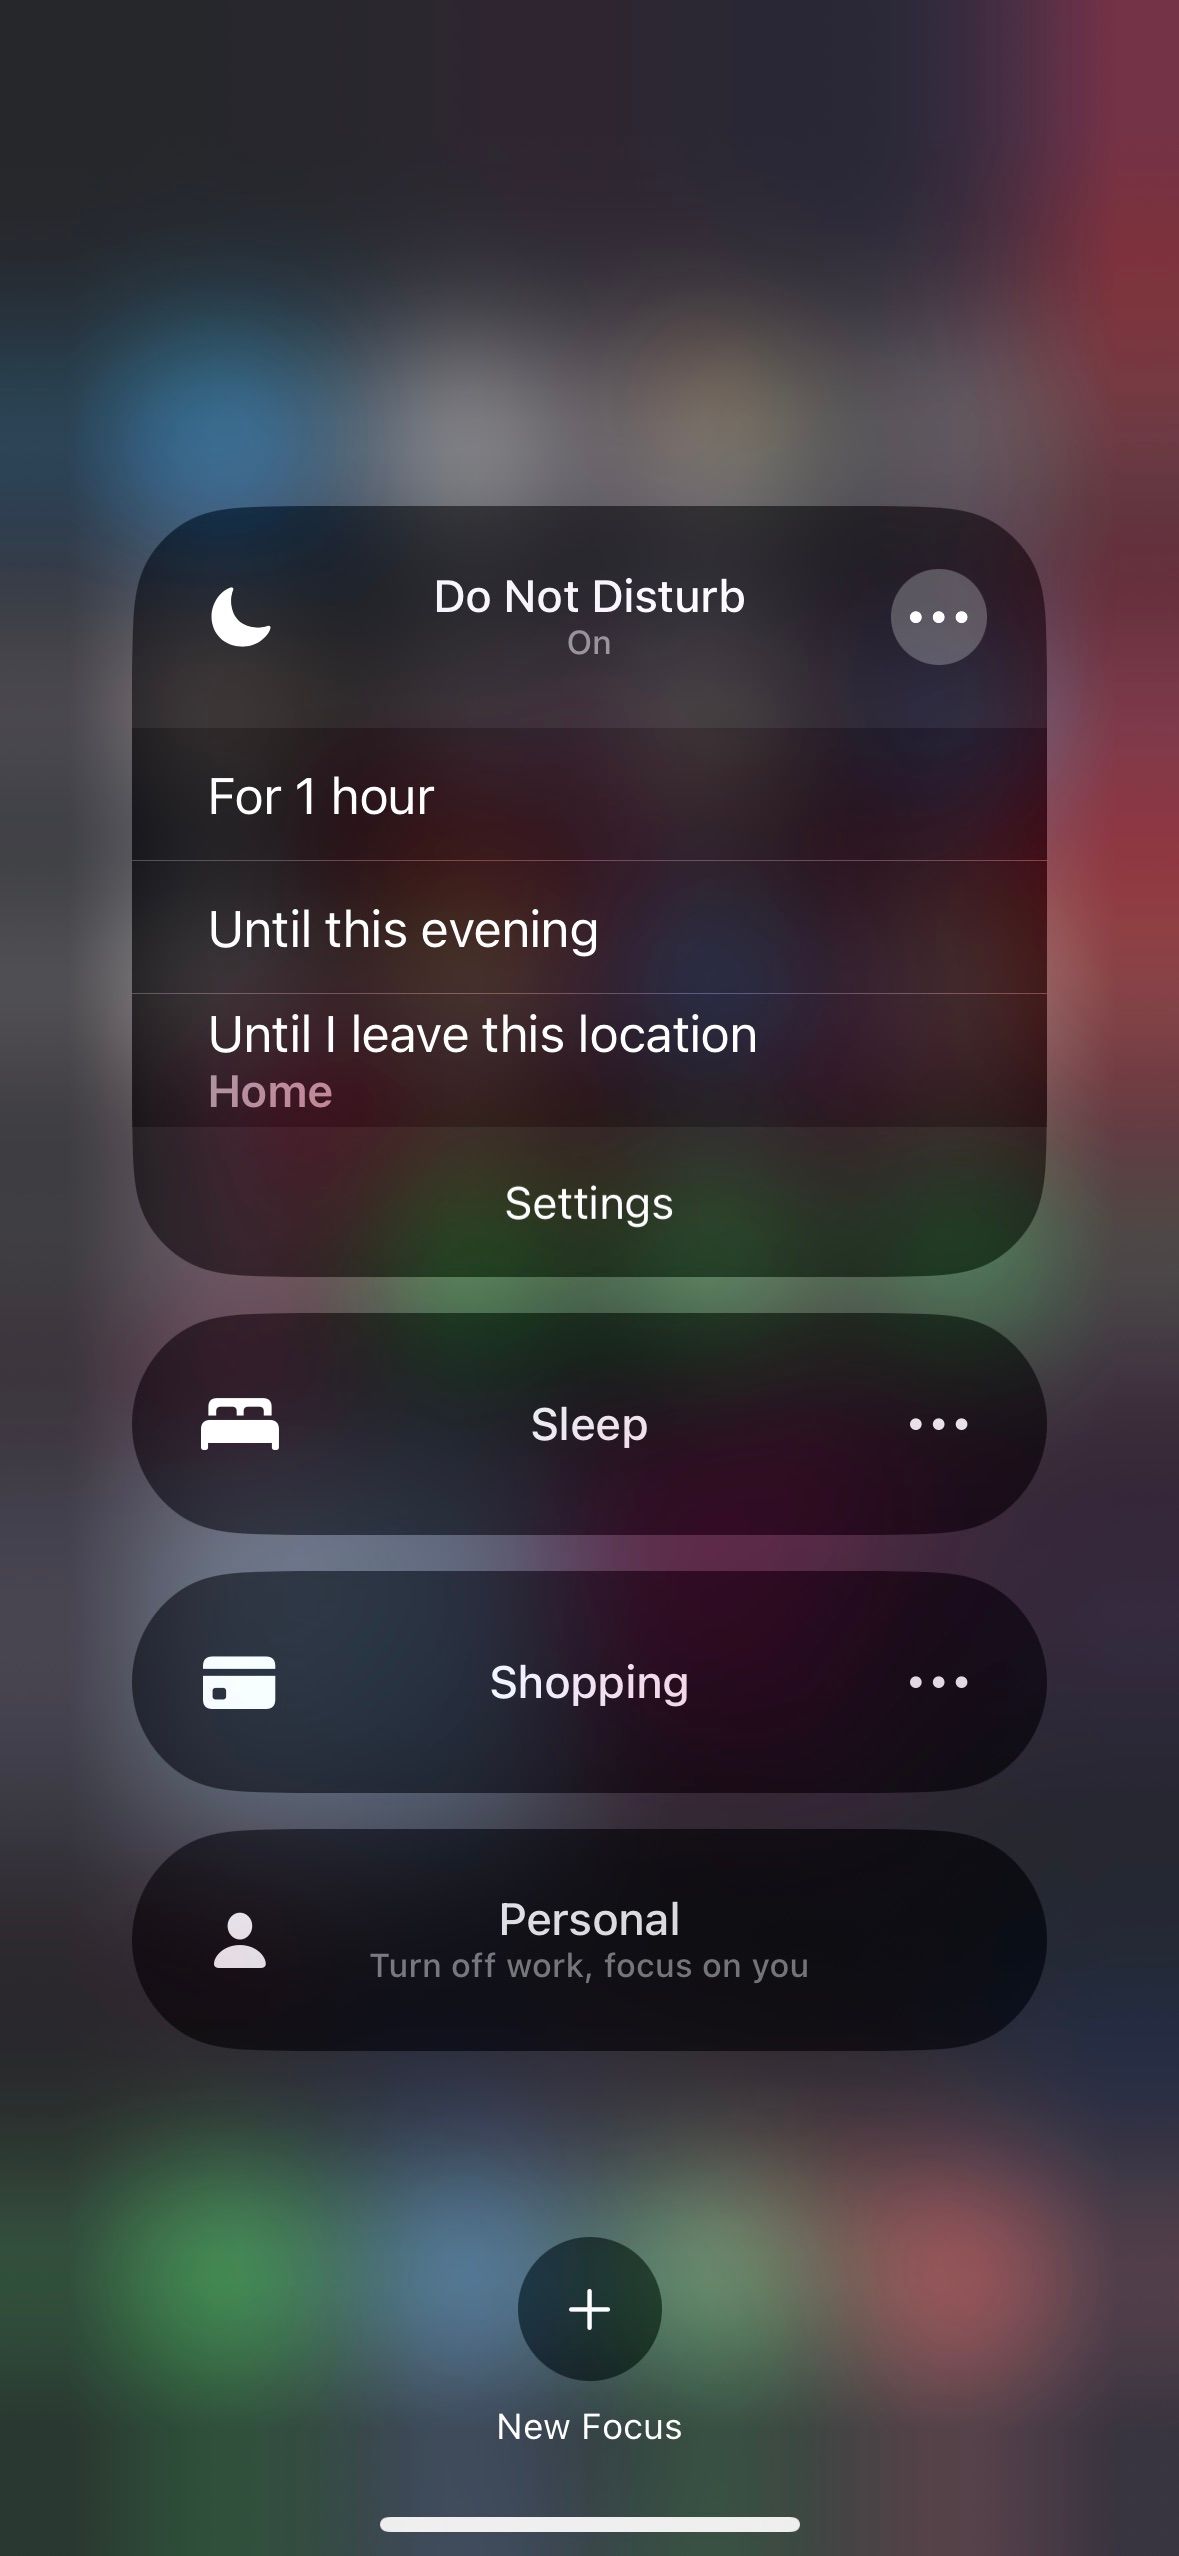 How to Turn Off Do Not Disturb or Focus on Your iPhone